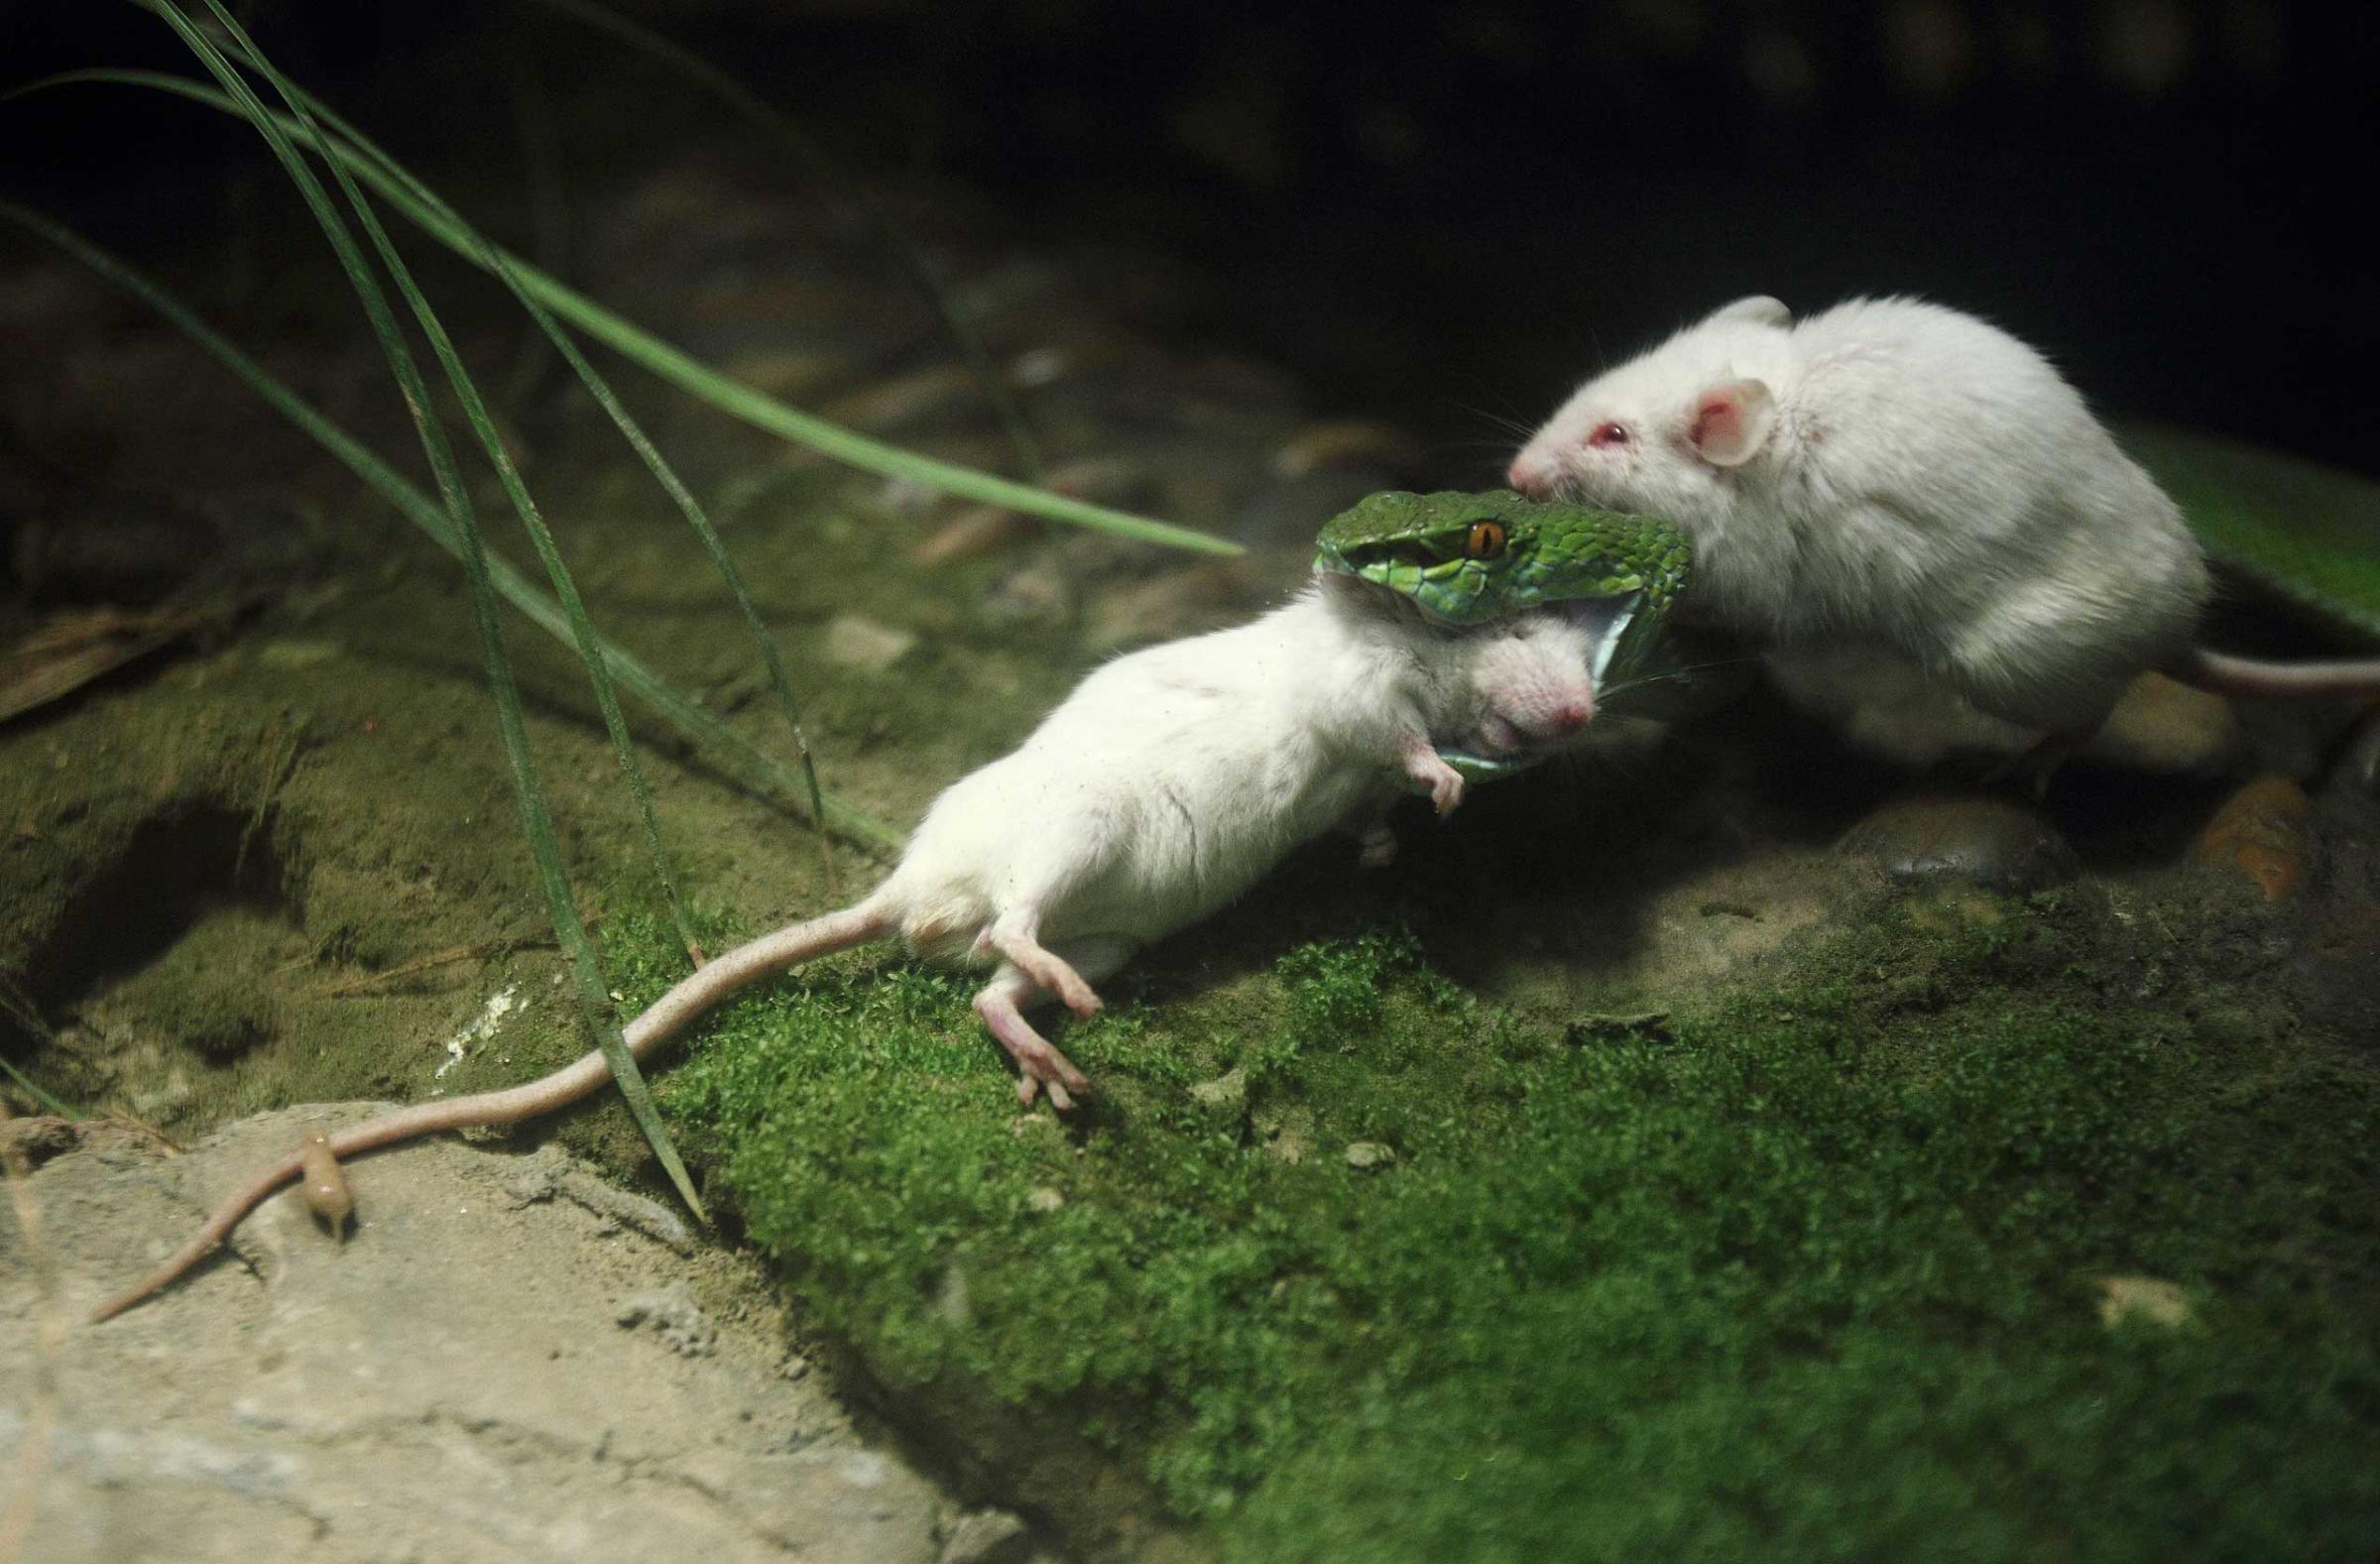 A mouse climbed onto back of a snake as the snake bites another mouse at a zoo in Hangzhou